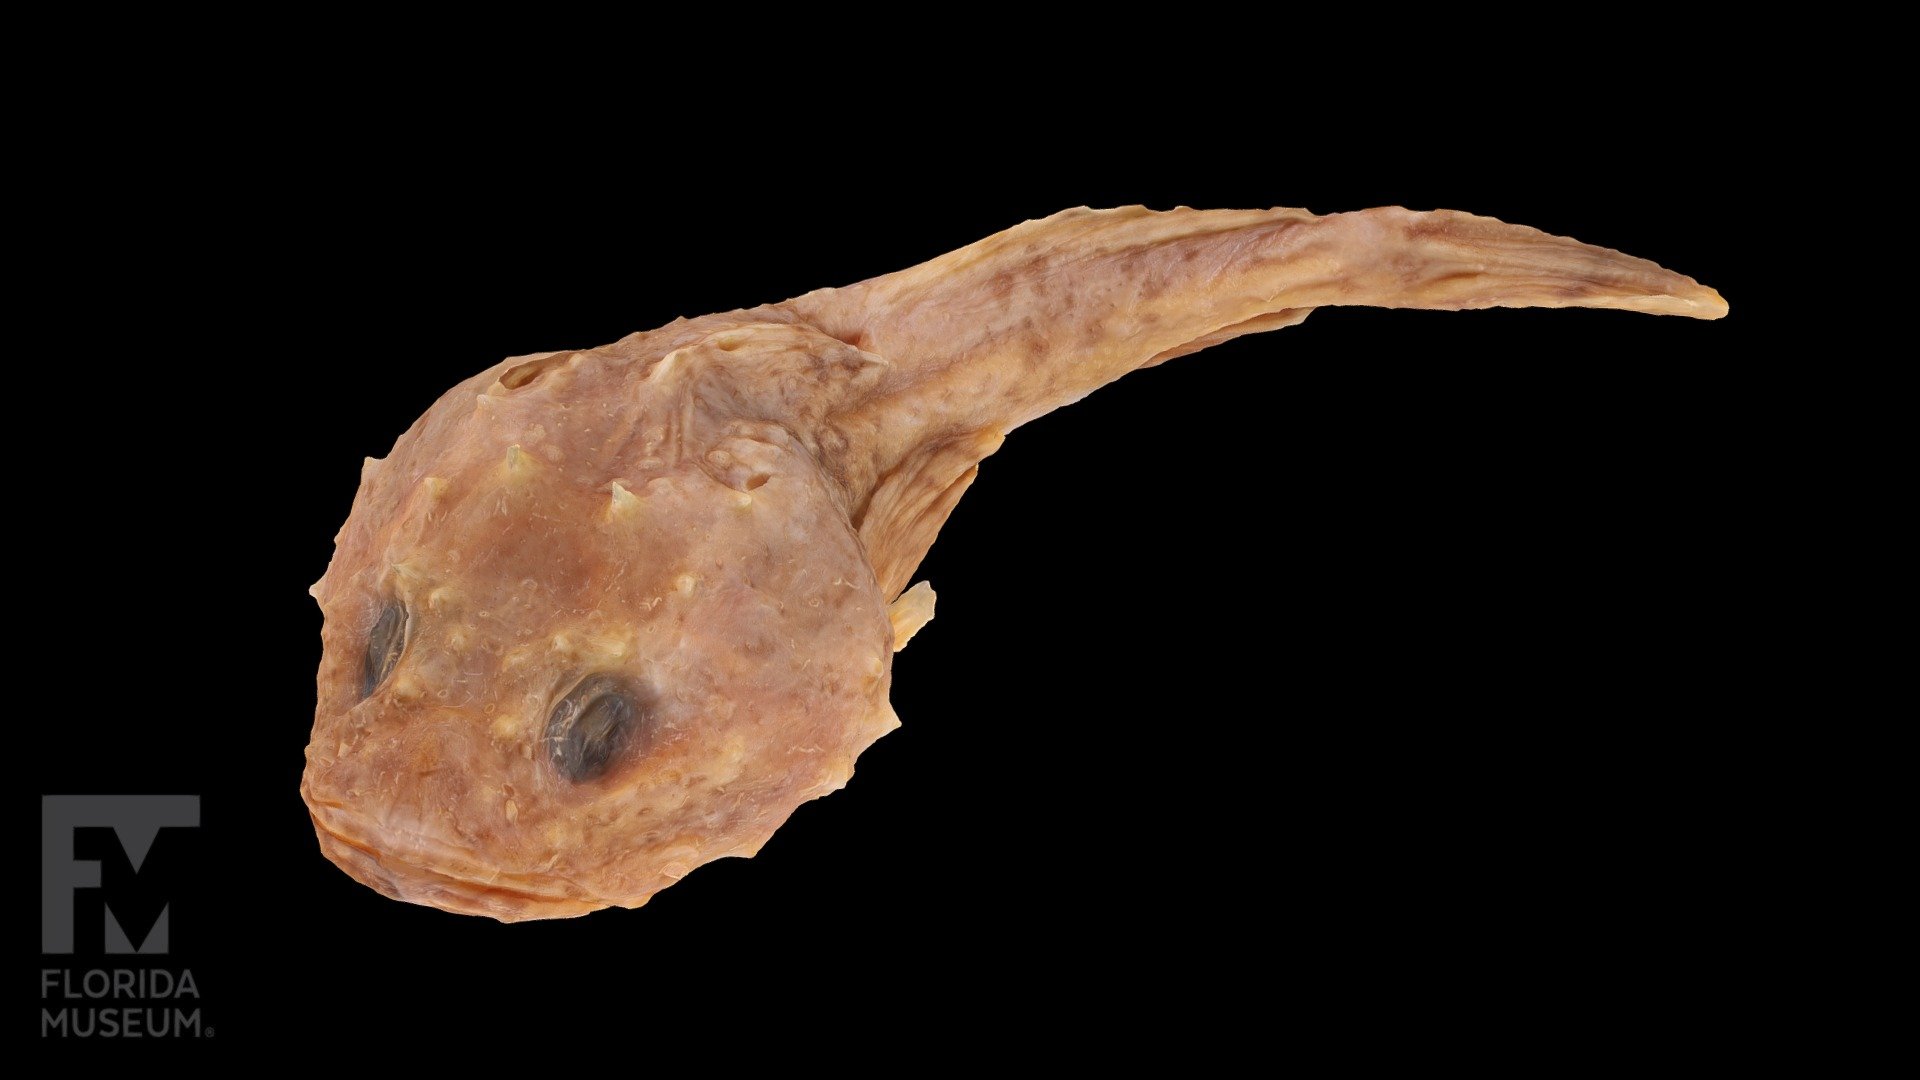 A fluid preserved Spinyhead Sculpin,Dasycottus setiger, from the Florida Museum of Natural History Ichthyology Collection (UF Fish 166797). Collected from the Bering Sea, north of Akuten Island in Alaska, USA.

Collection info for this specimen can be found here: (http://specifyportal.flmnh.ufl.edu/fishes/). Search “166797” for catalog number.

Ichthyology Collection: https://www.floridamuseum.ufl.edu/fish/

Funded by the National Science Foundation, Moving and Improving the Florida Museum of Natural History Fish Collection (NSF DBI 2210415) 3d model